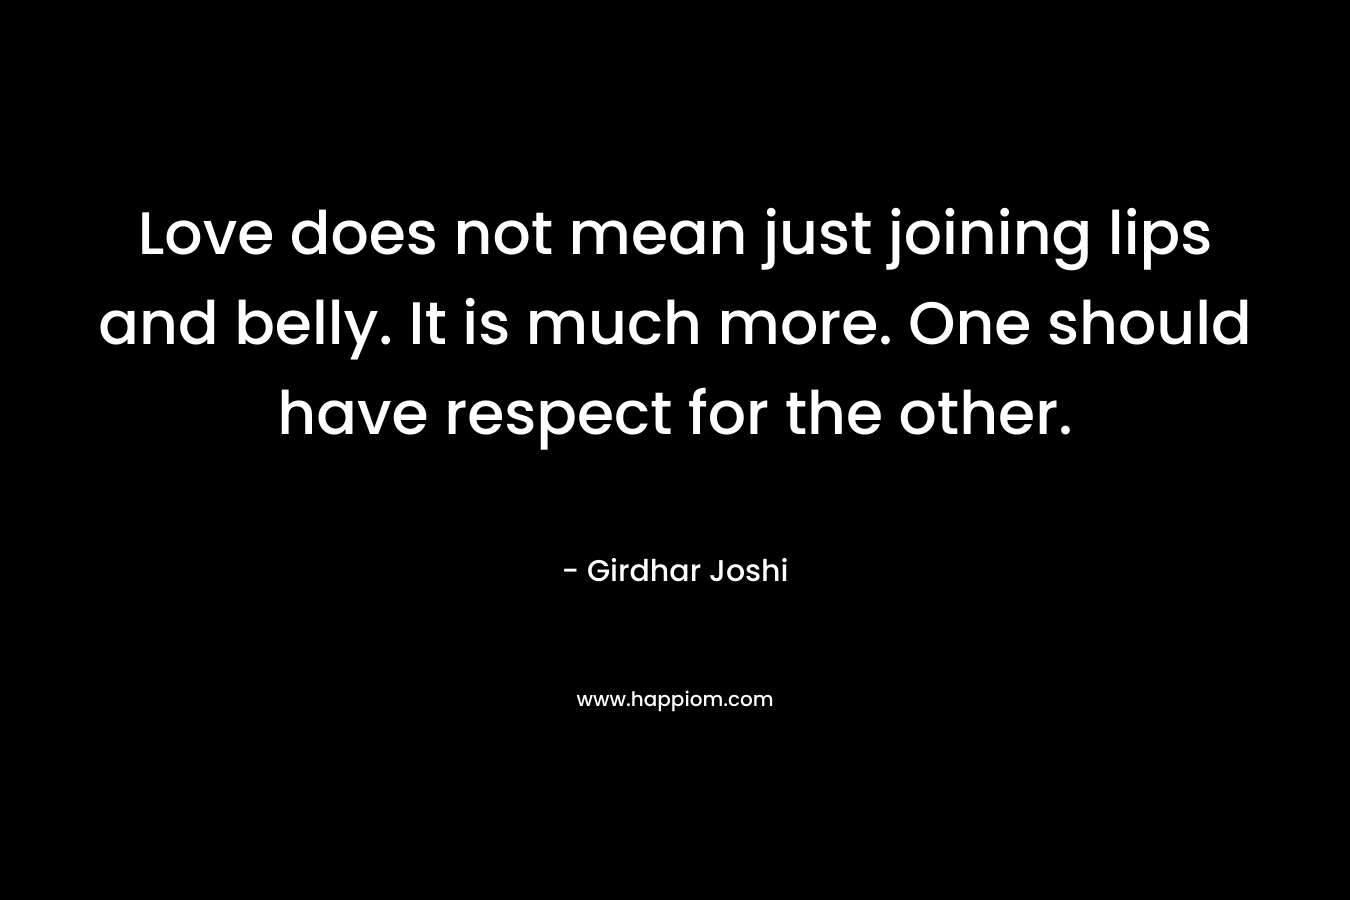 Love does not mean just joining lips and belly. It is much more. One should have respect for the other. – Girdhar Joshi